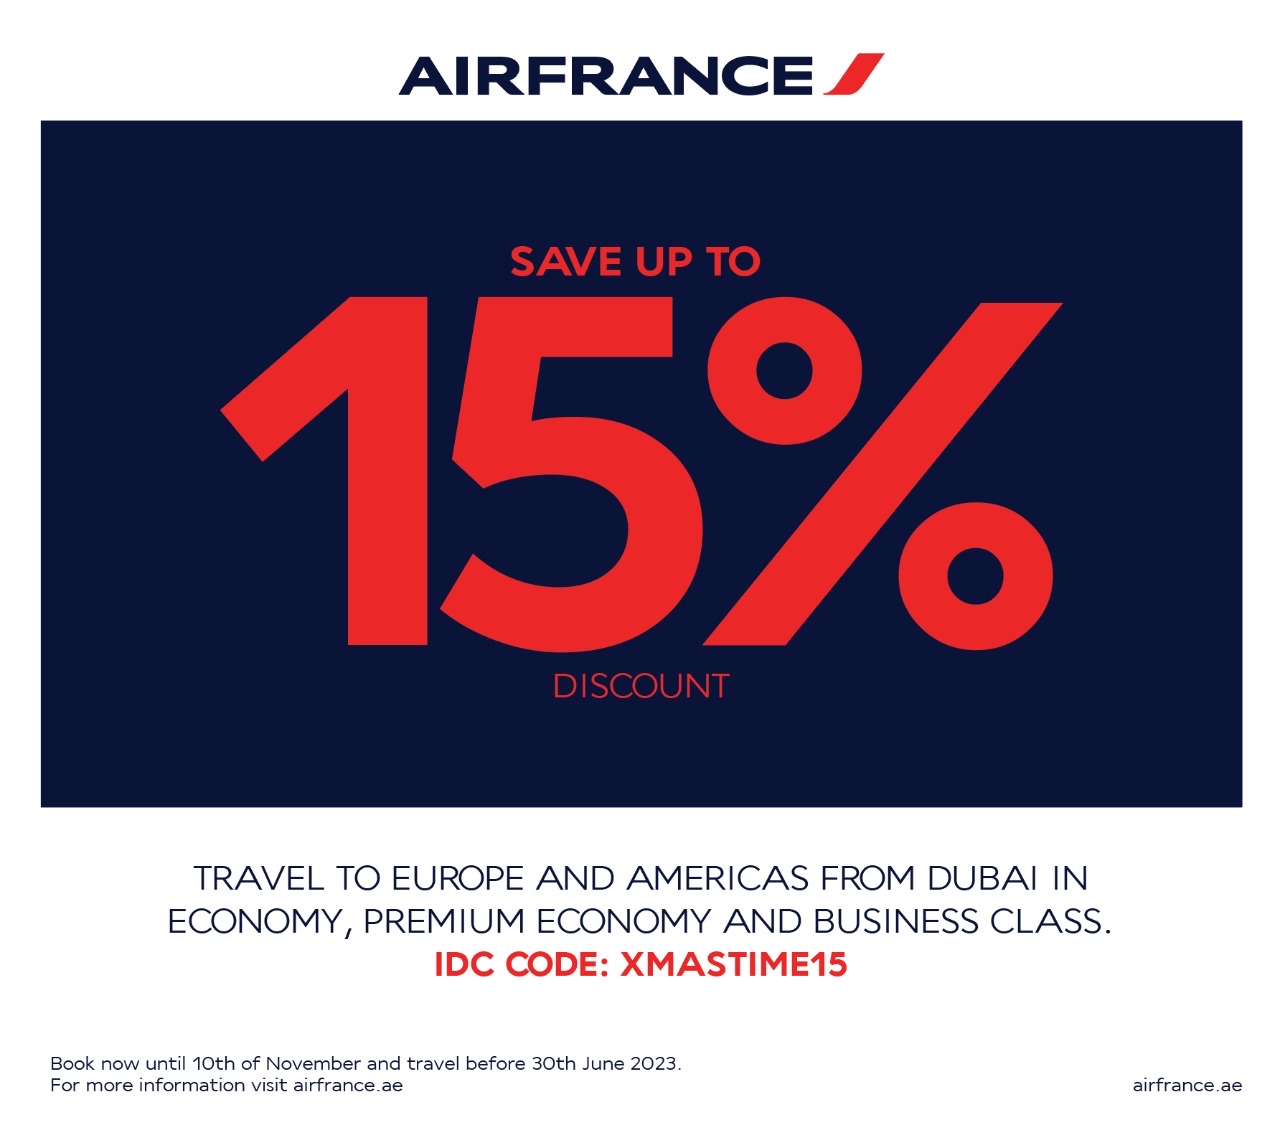 Discount from Dubai to Europe and America